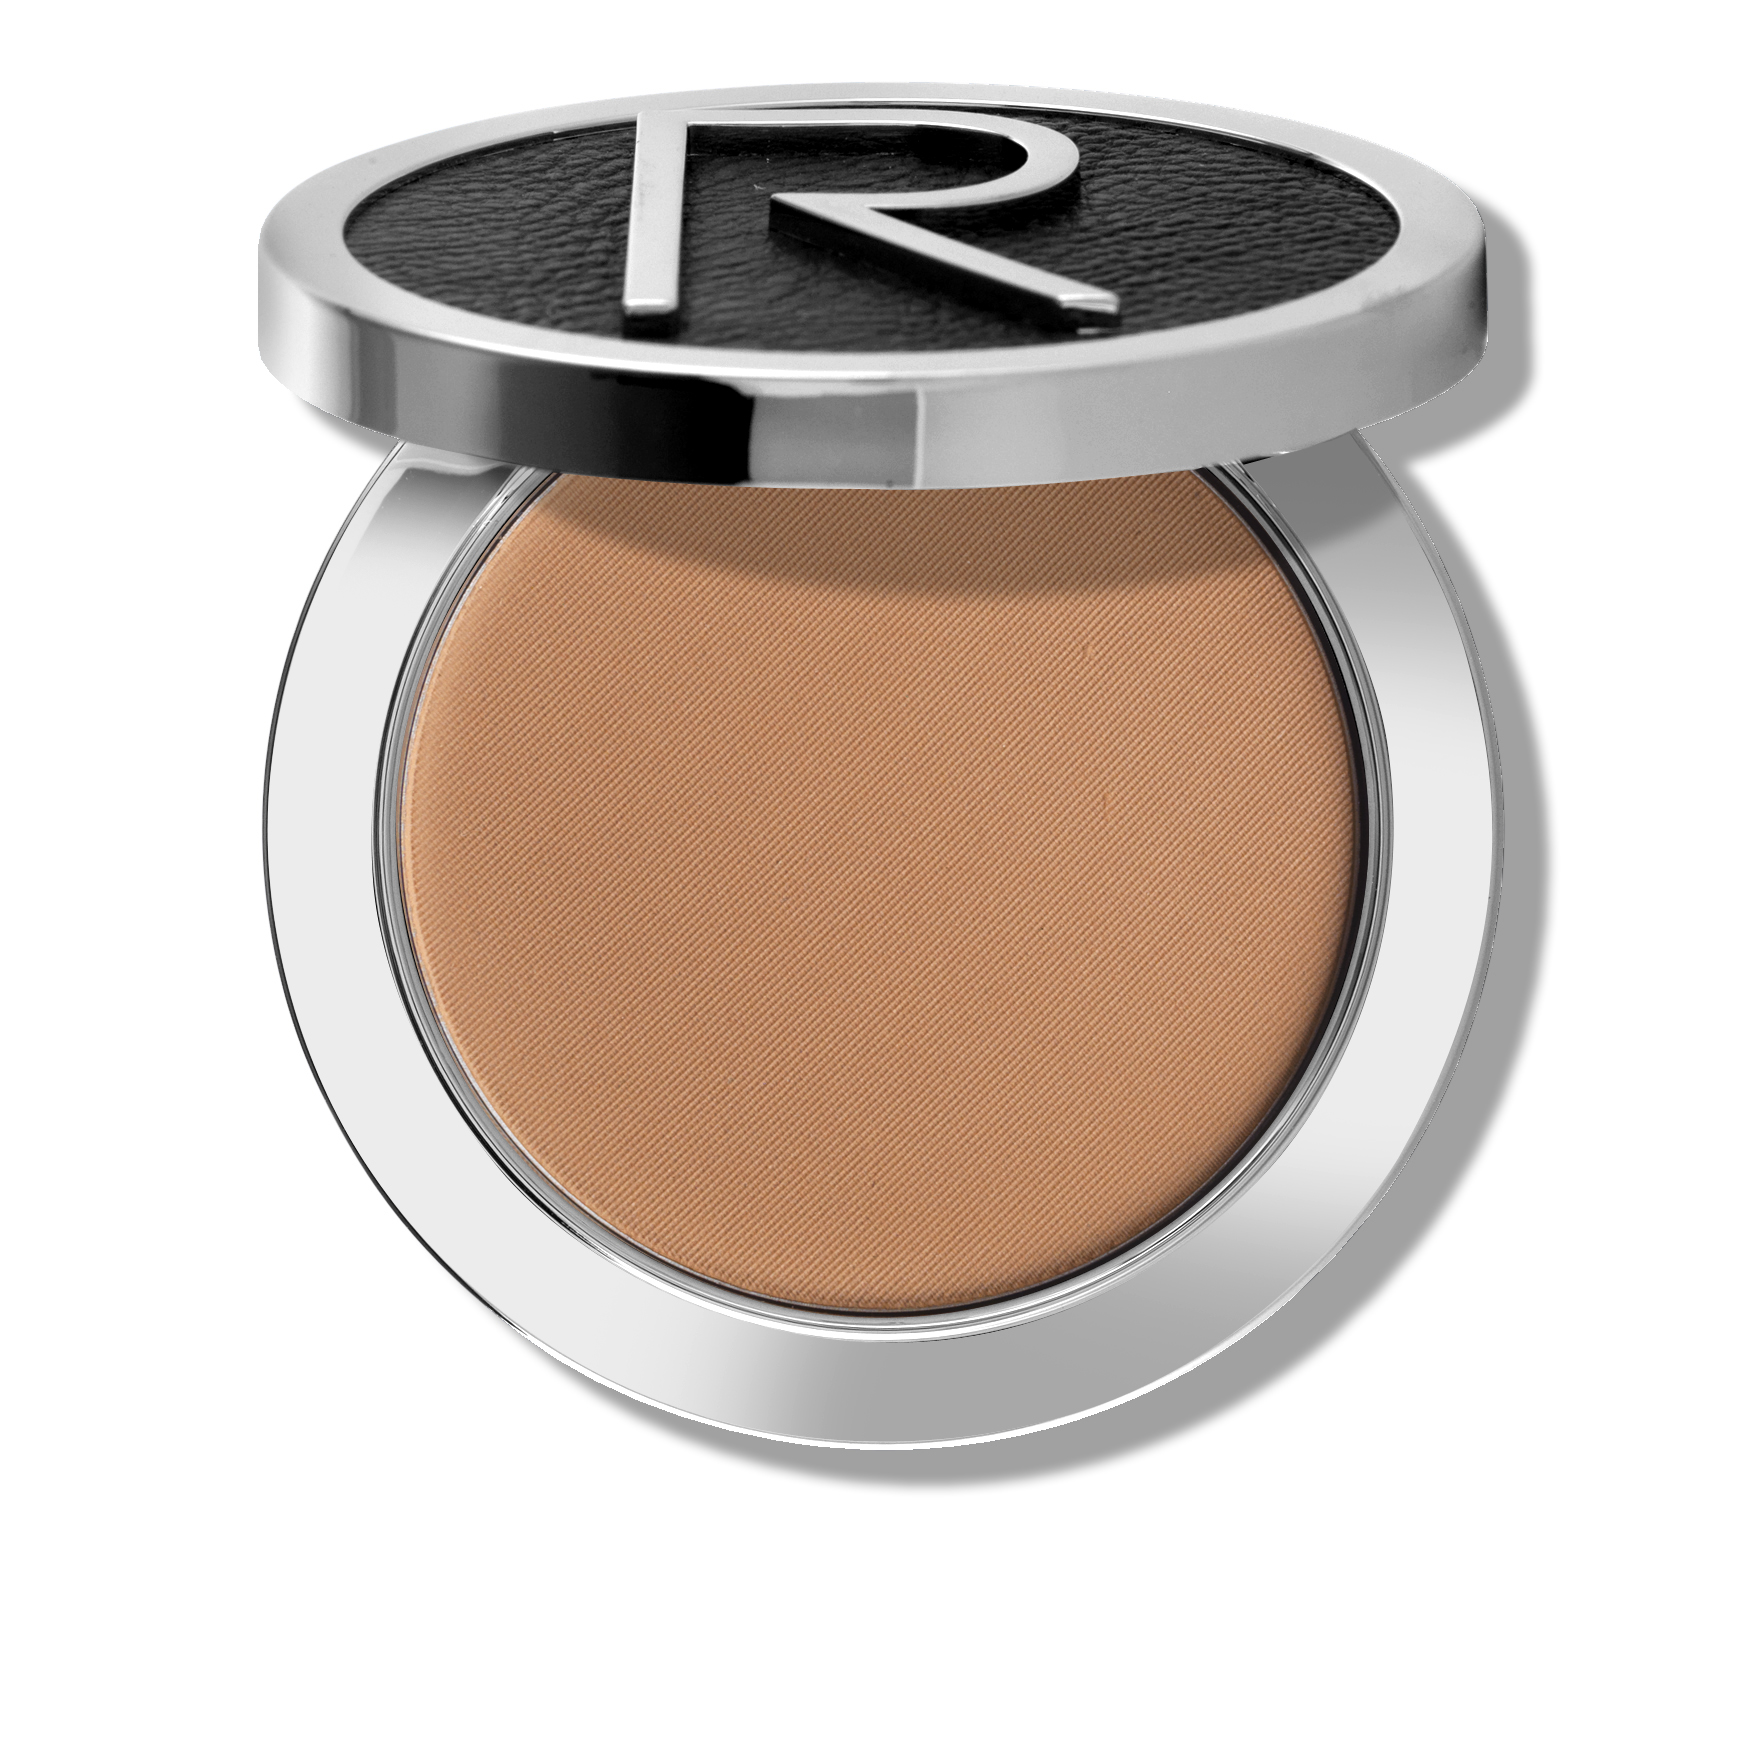 Rodial Instaglam Compact Deluxe Bronzing Powder | Space NK